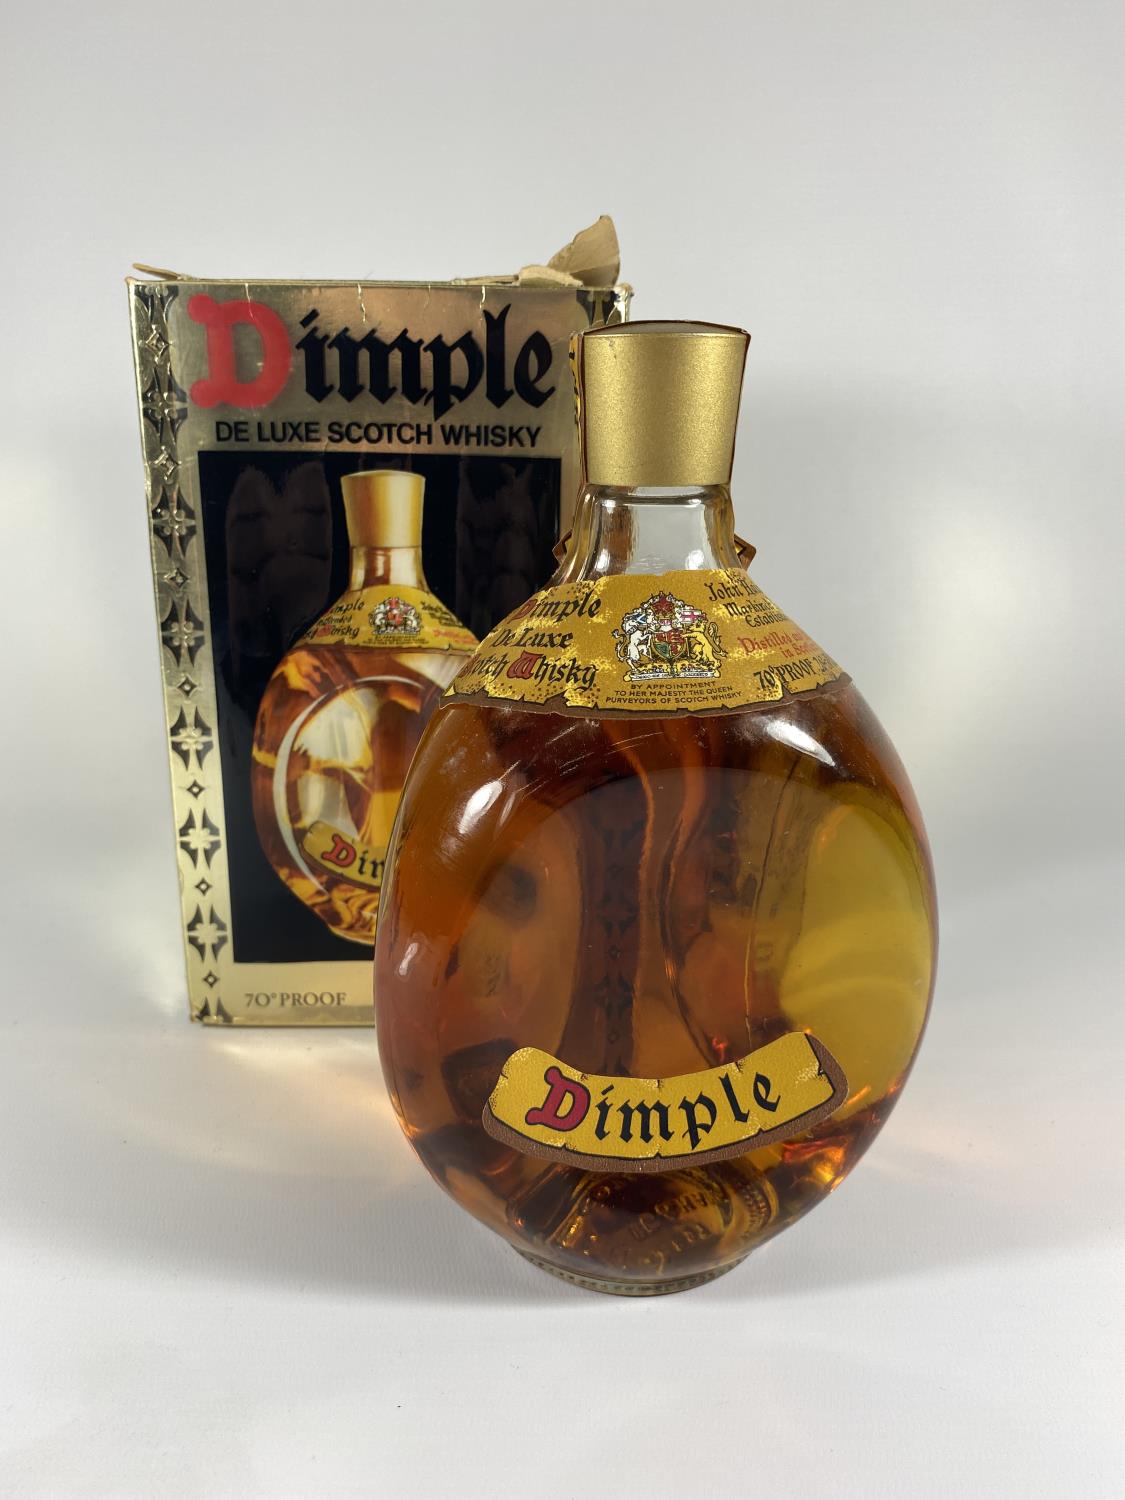 A BOXED DIMPLE DE LUXE SCOTCH WHISKY 70 PROOF 26 2/3 FL.OZS. PROCEEDS TO BE DONATED TO EAST CHESHIRE